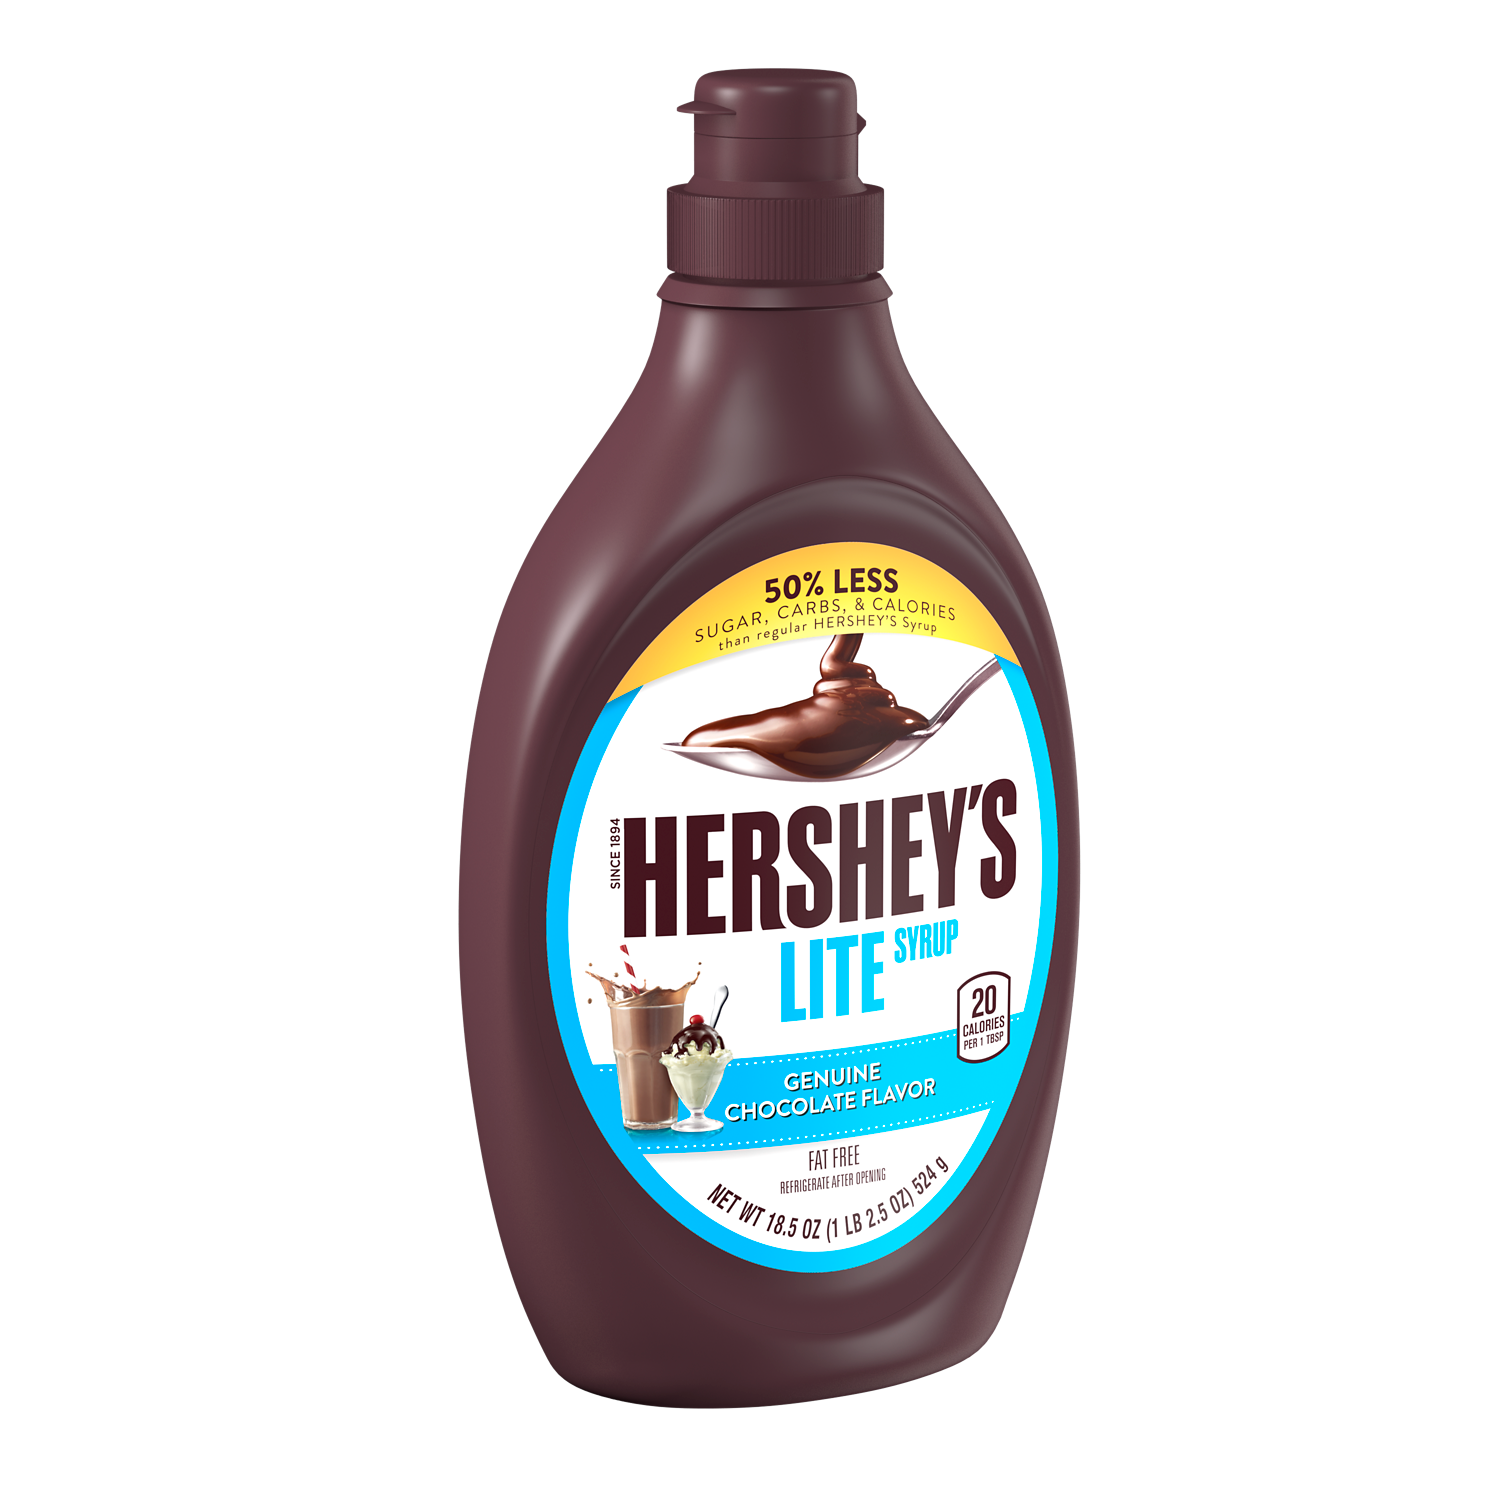 HERSHEY'S Chocolate Lite Syrup, 18.5 oz bottle - Left Side of Package